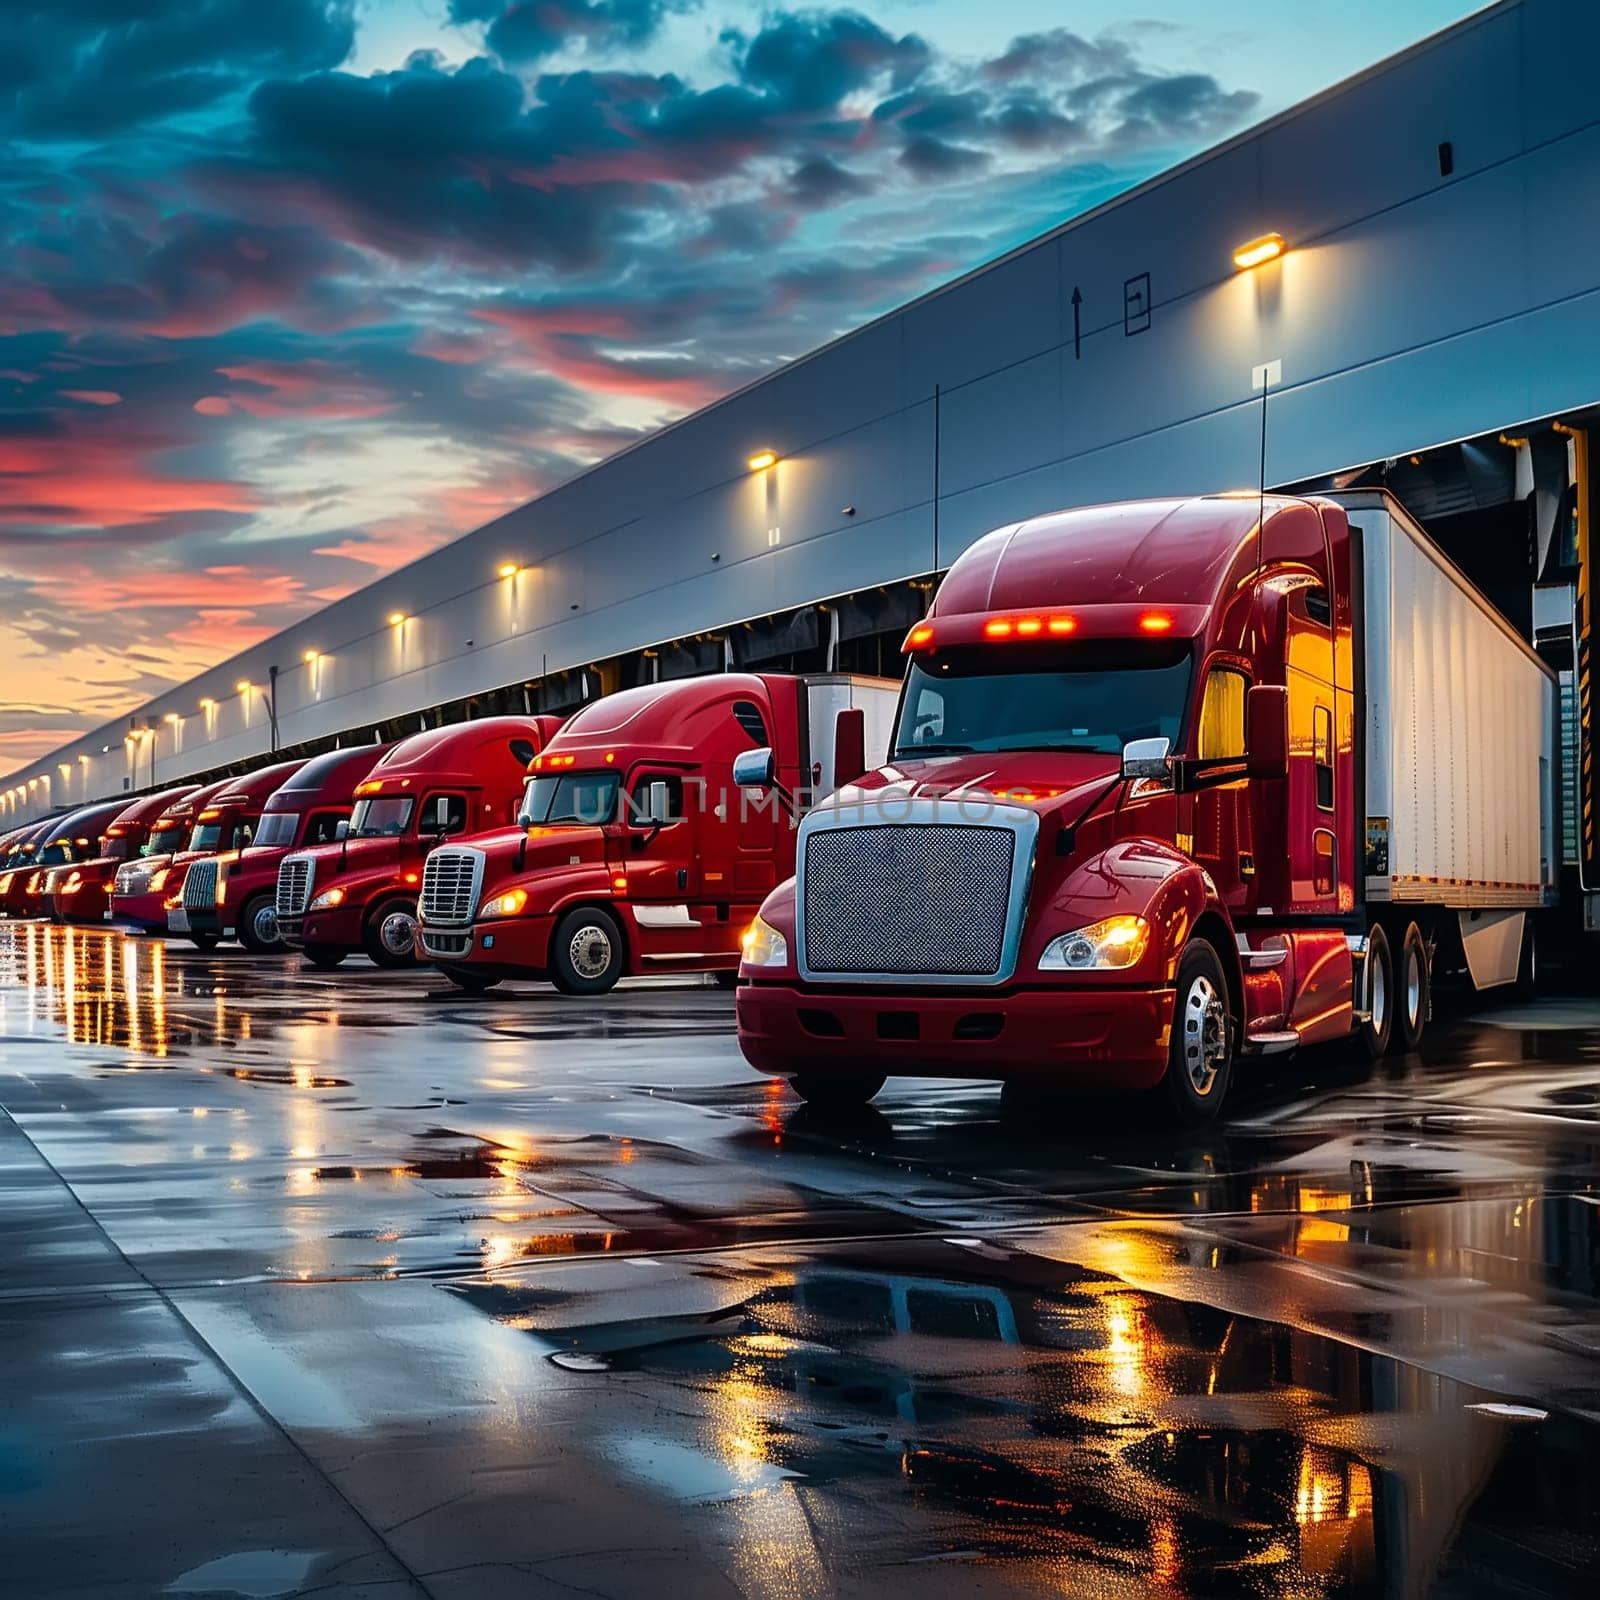 Semi Trailer Trucks on The Parking Lot. Trucks Loading at Dock Warehouse. Shipping Cargo Container Delivery Trucks. Distribution Warehouse. Freight Trucks Cargo Transport. Warehouse Logistic